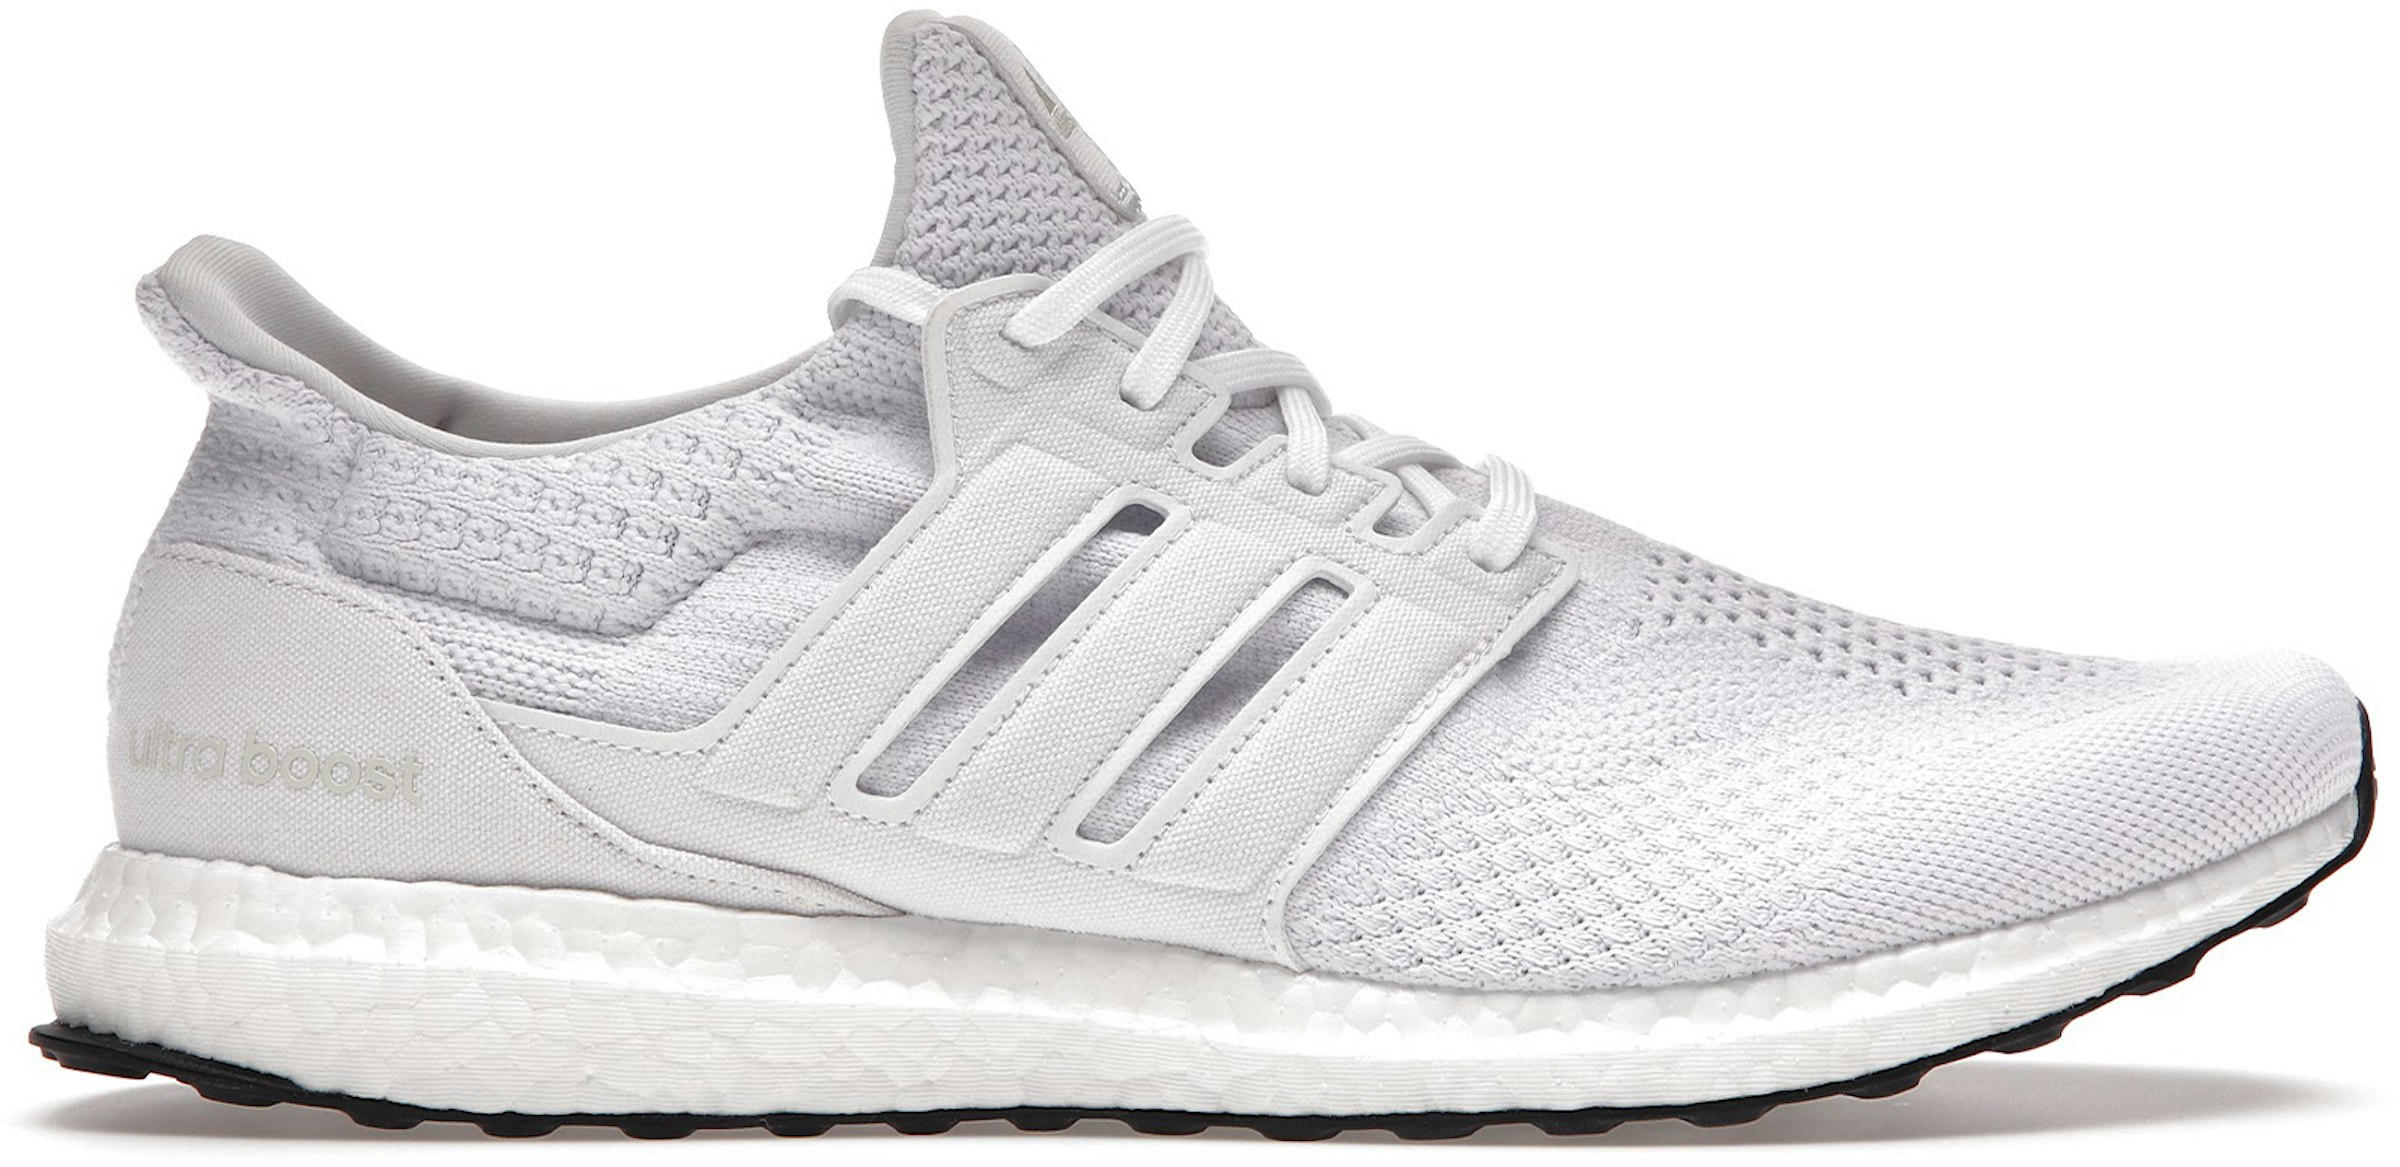 adidas Ultra Boost 5.0 DNA White Men's - FY9349 - US